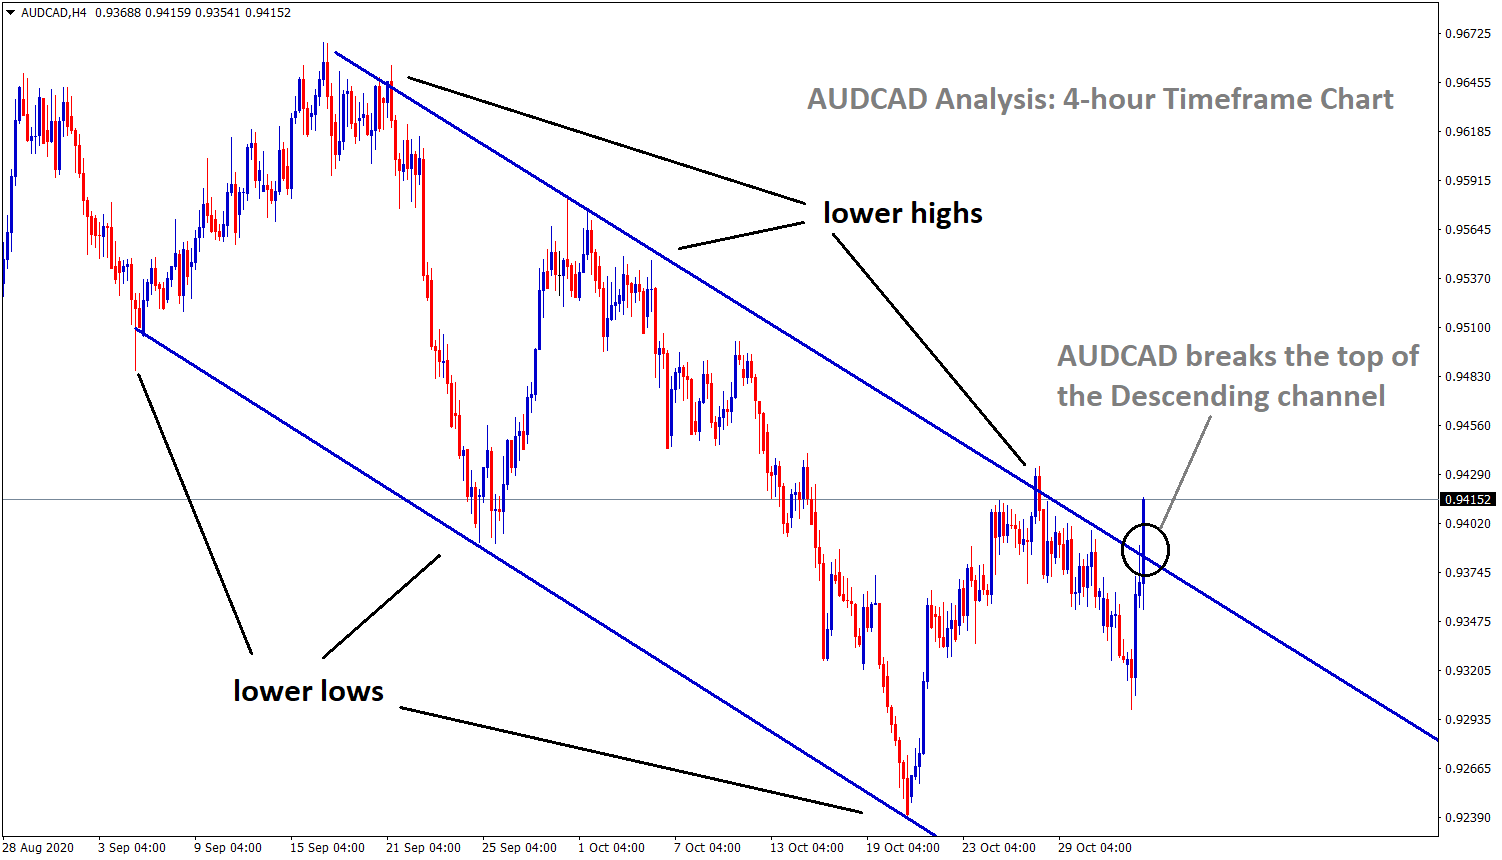 AUDCAD breaks the top of the descending channel